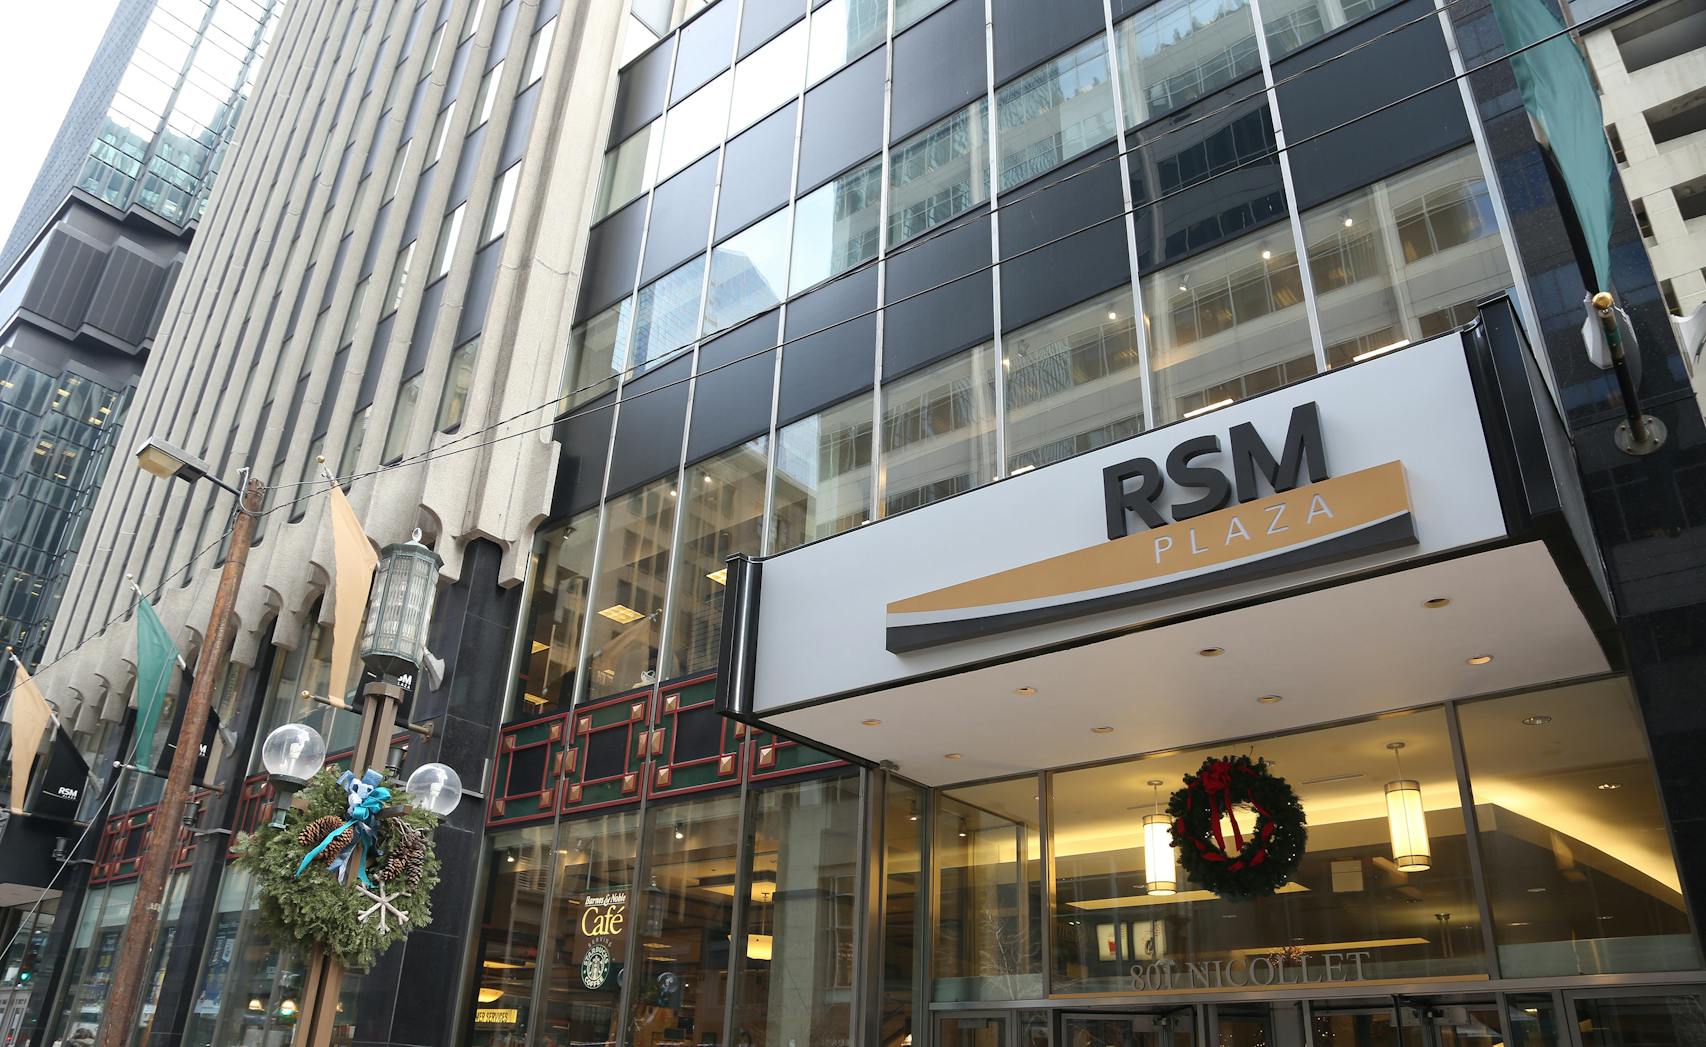 RSM has tried to keep a fluid back-to-office policy while also encouraging on-site mentoring. Shown in this file photo is the company's offices in Minneapolis.